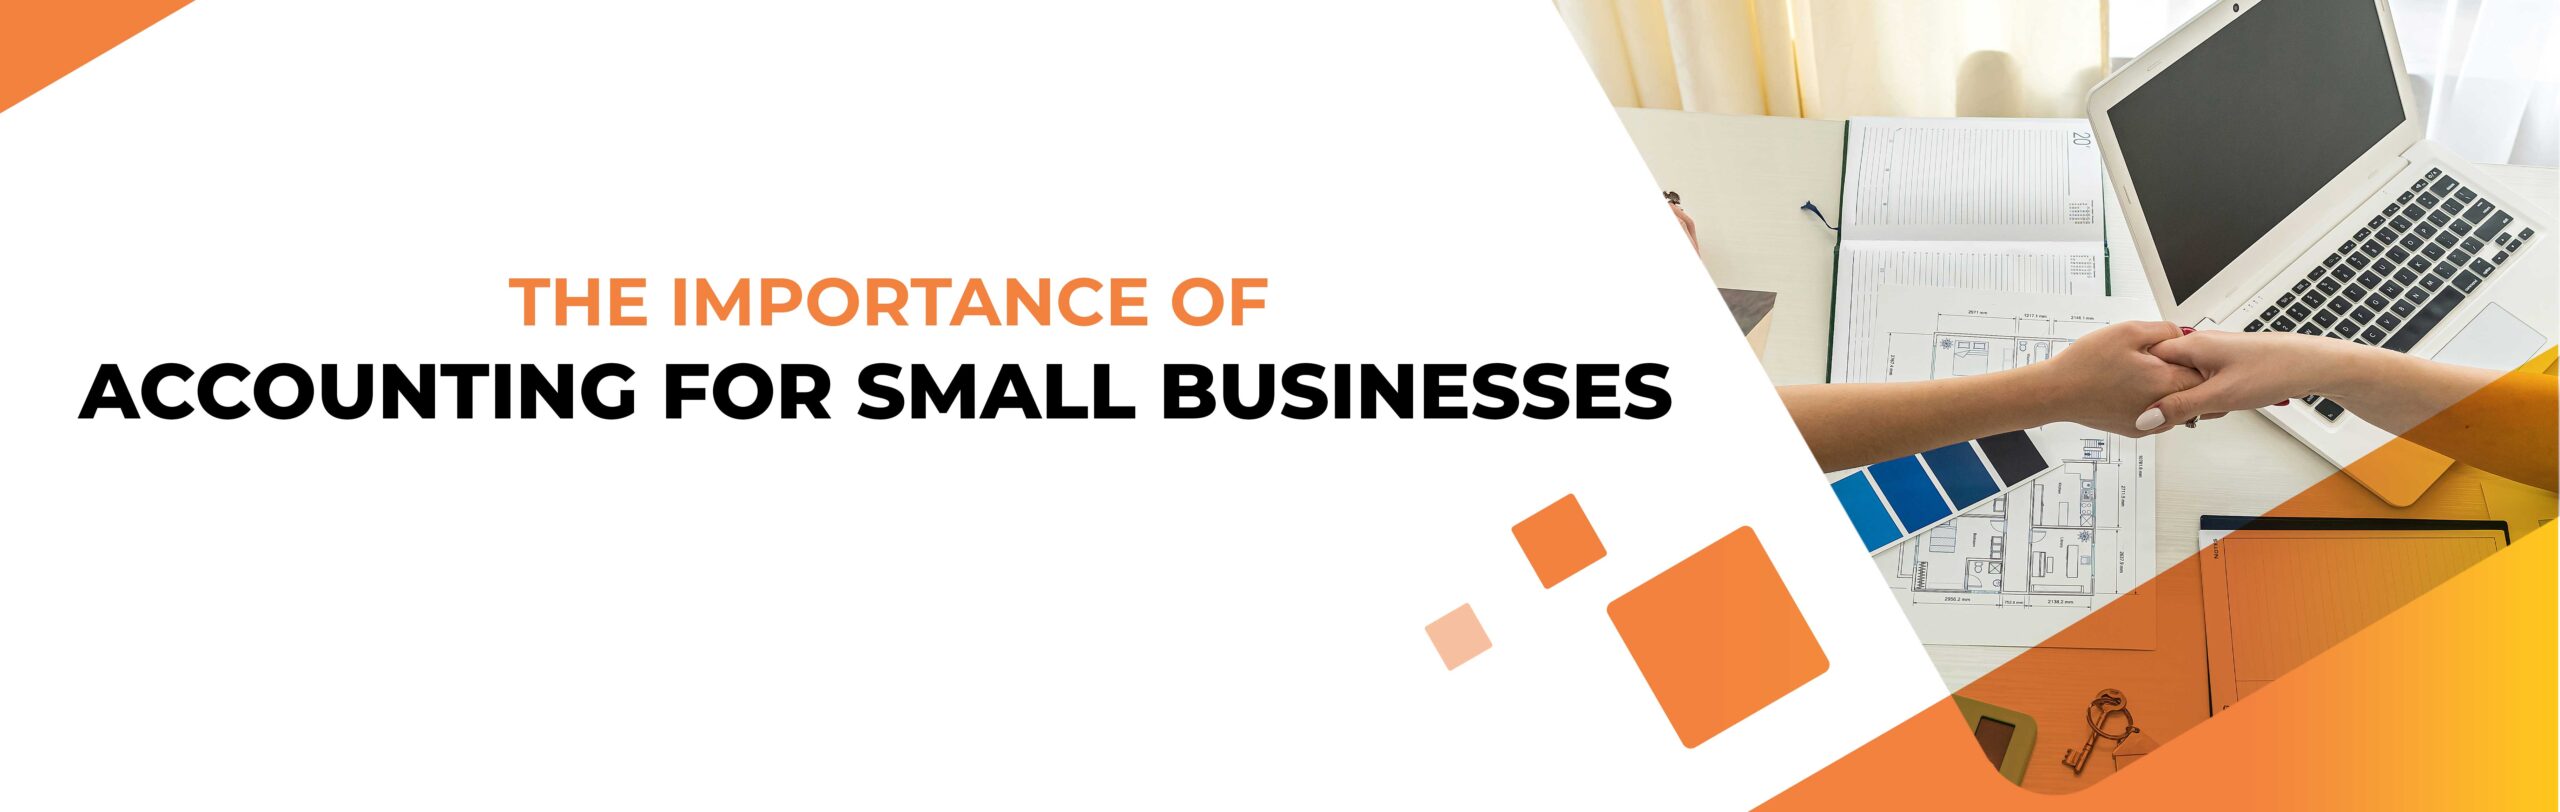 The Importance of Accounting for Small Businesses